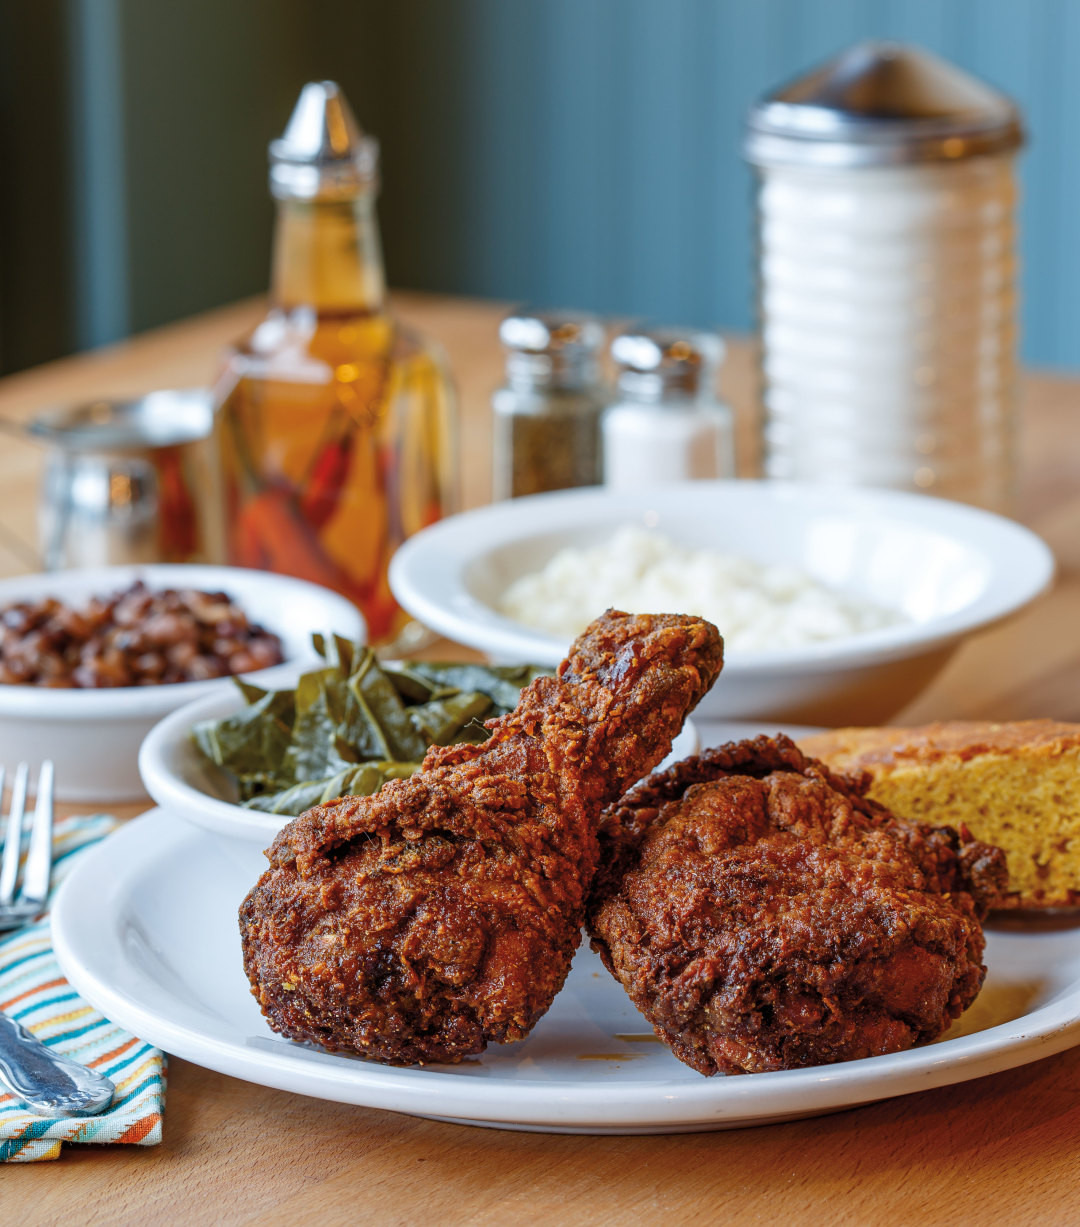 Fried Chicken Portland Lovely Does Muscadine Make Portland’s Best Fried Chicken